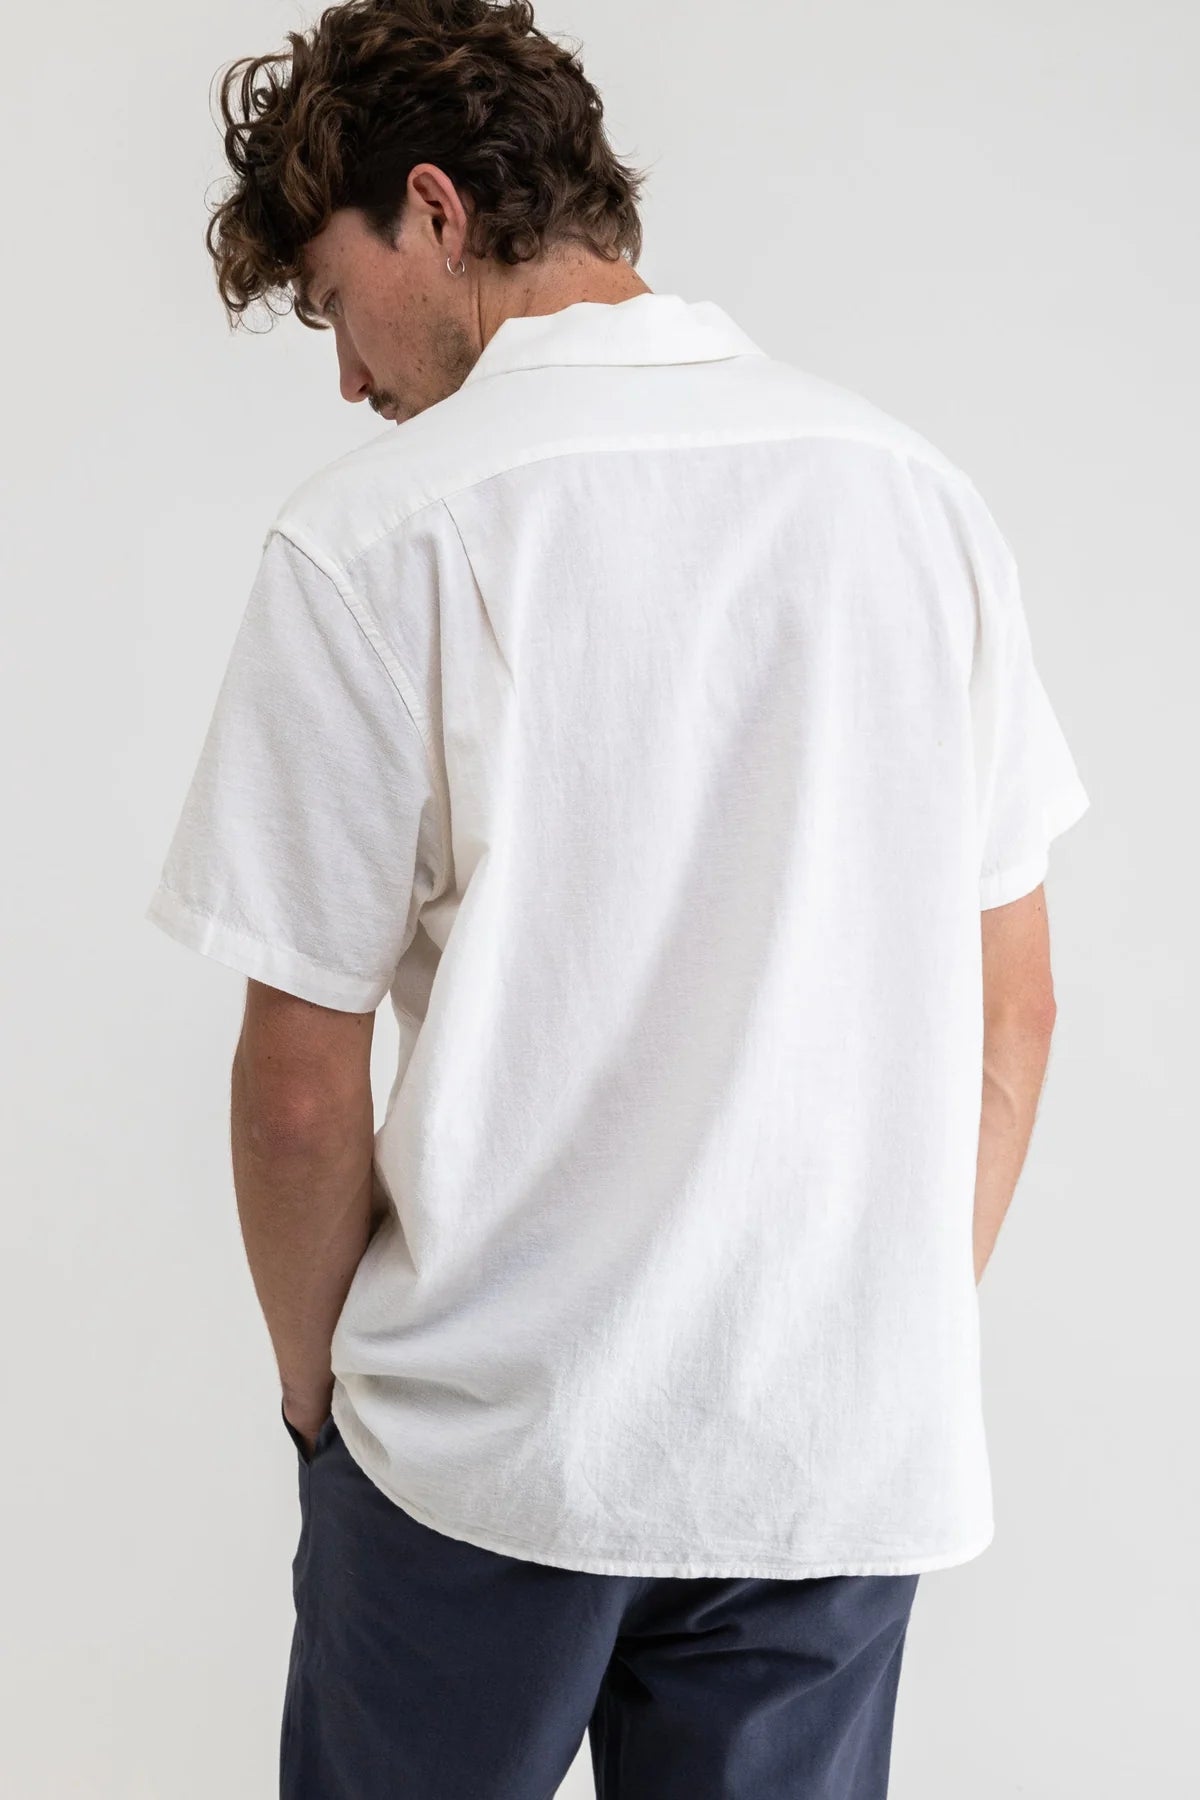 Back view of the white Classic Linen Short Sleeve Men's Shirt by Rhythm